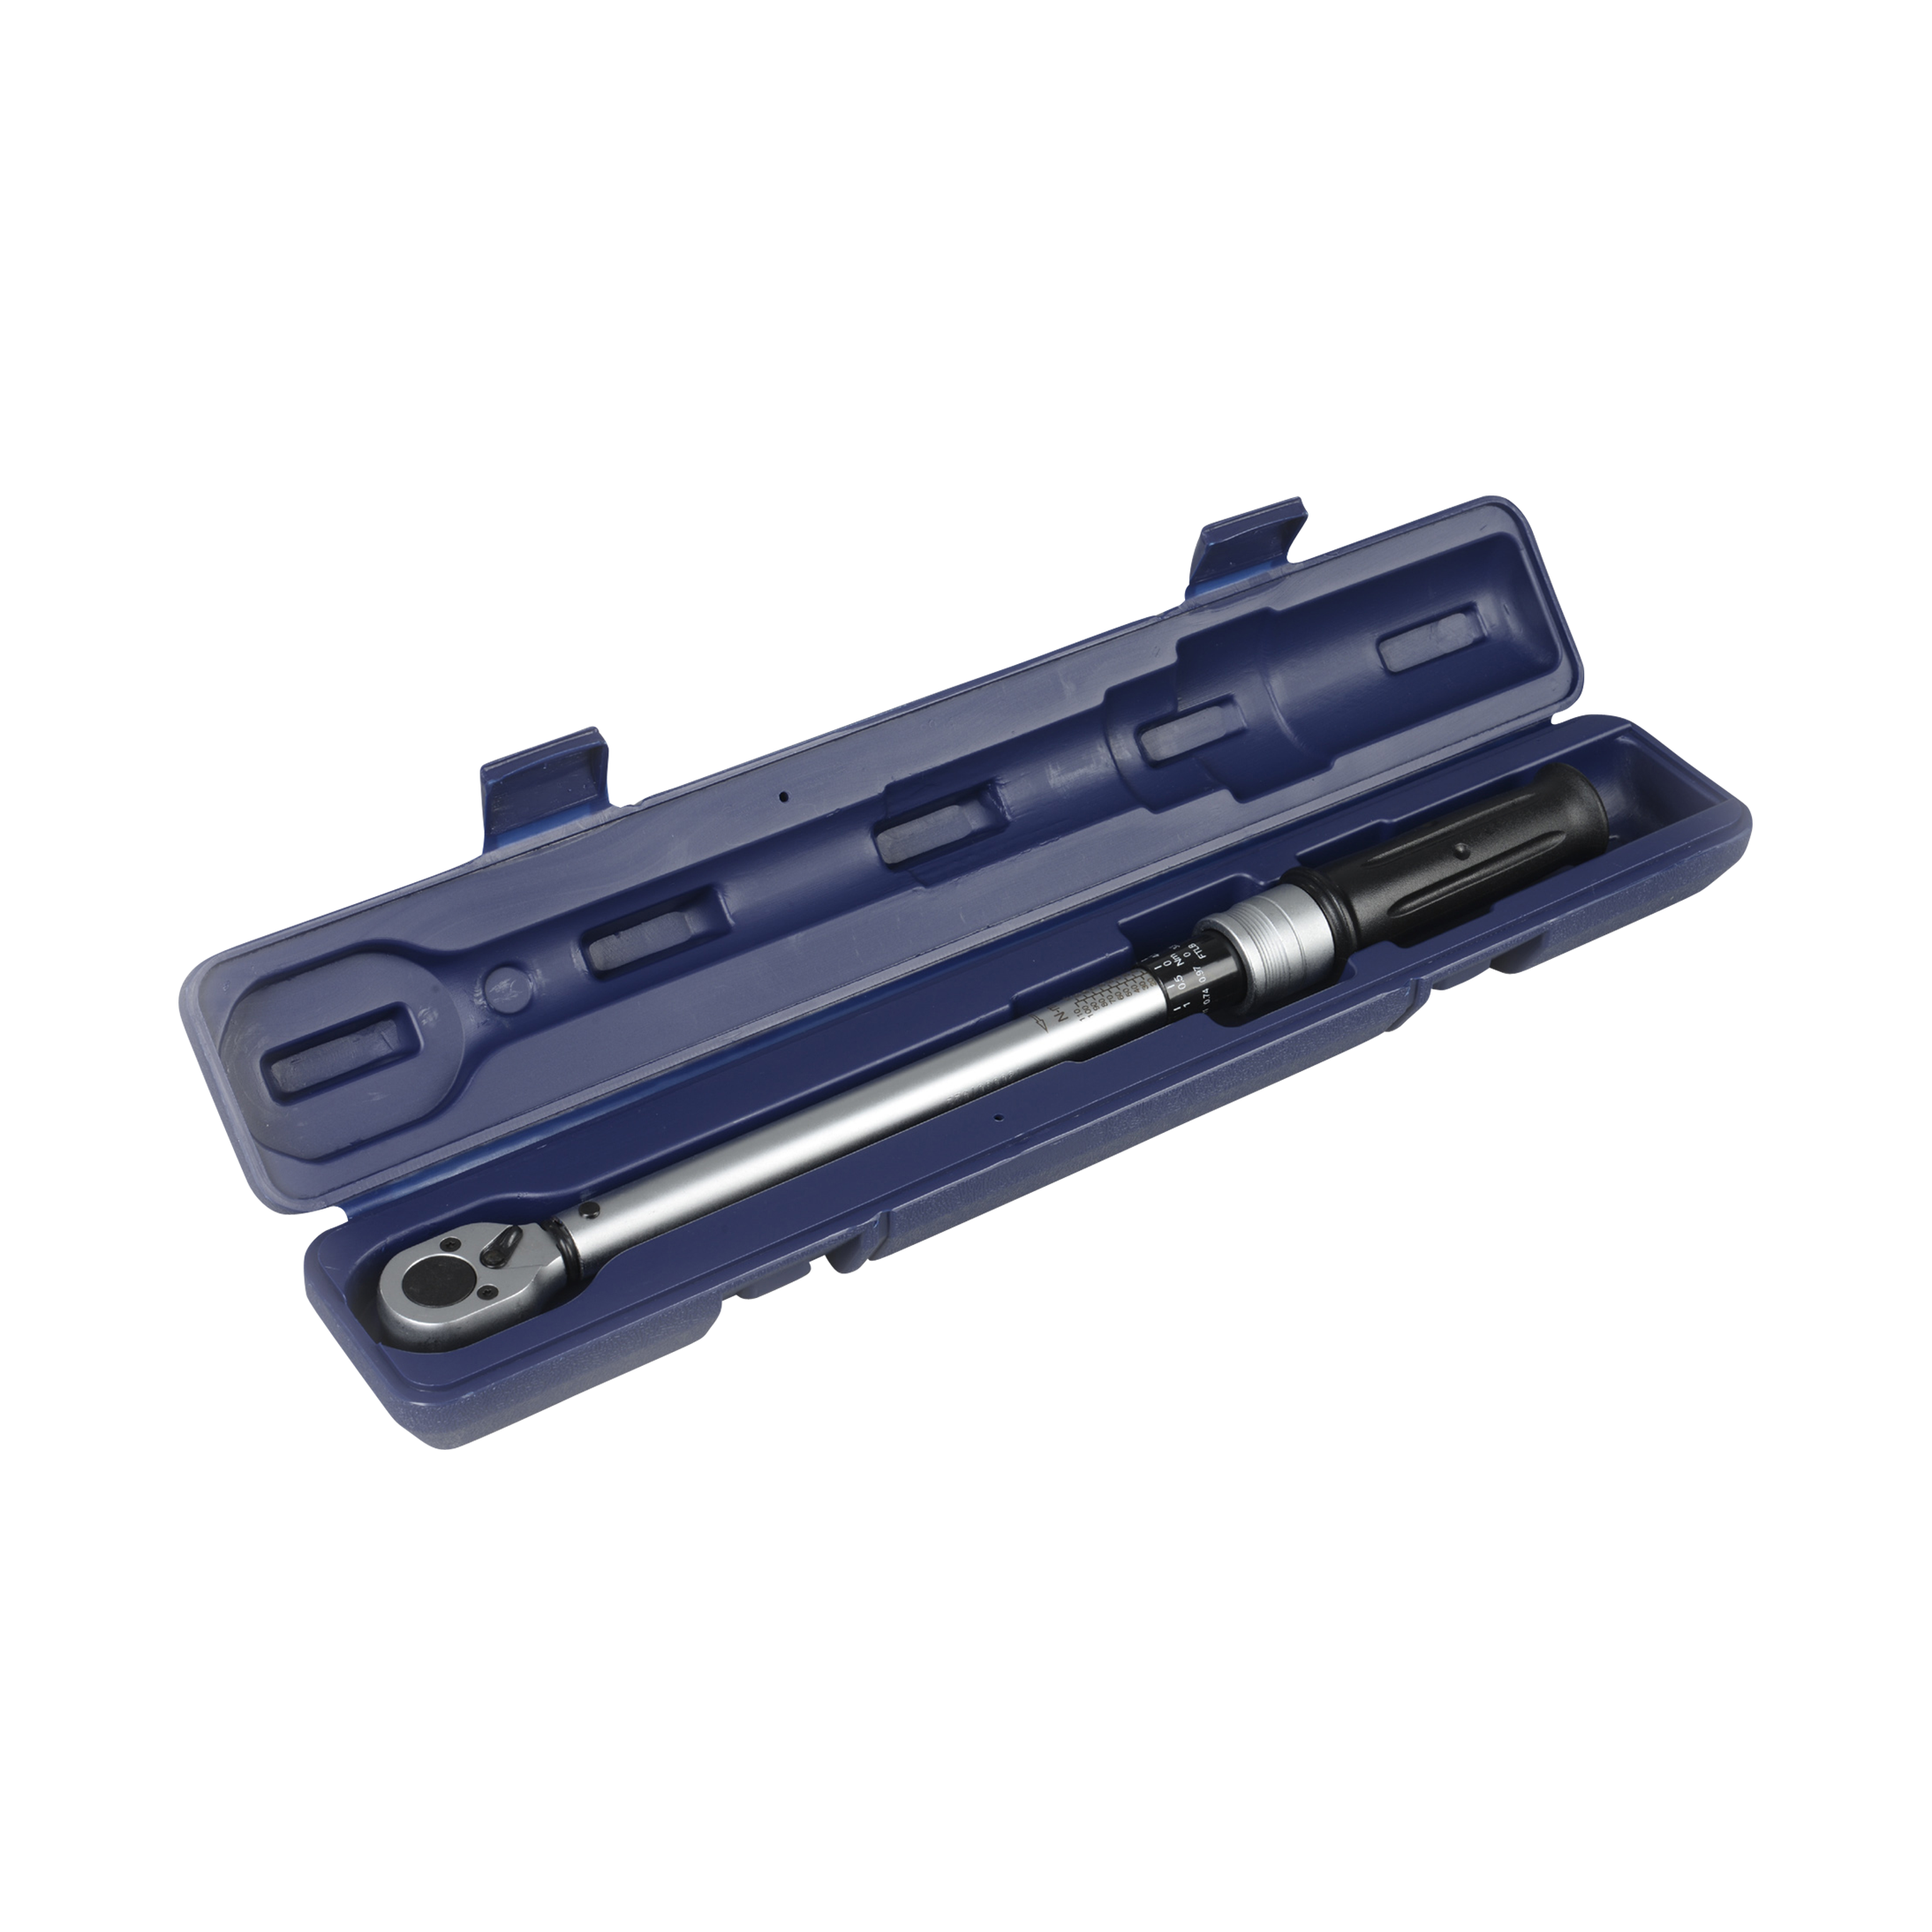 Proworks Torque Wrench 3/8 5-60Nm - Buy now, get 31% off